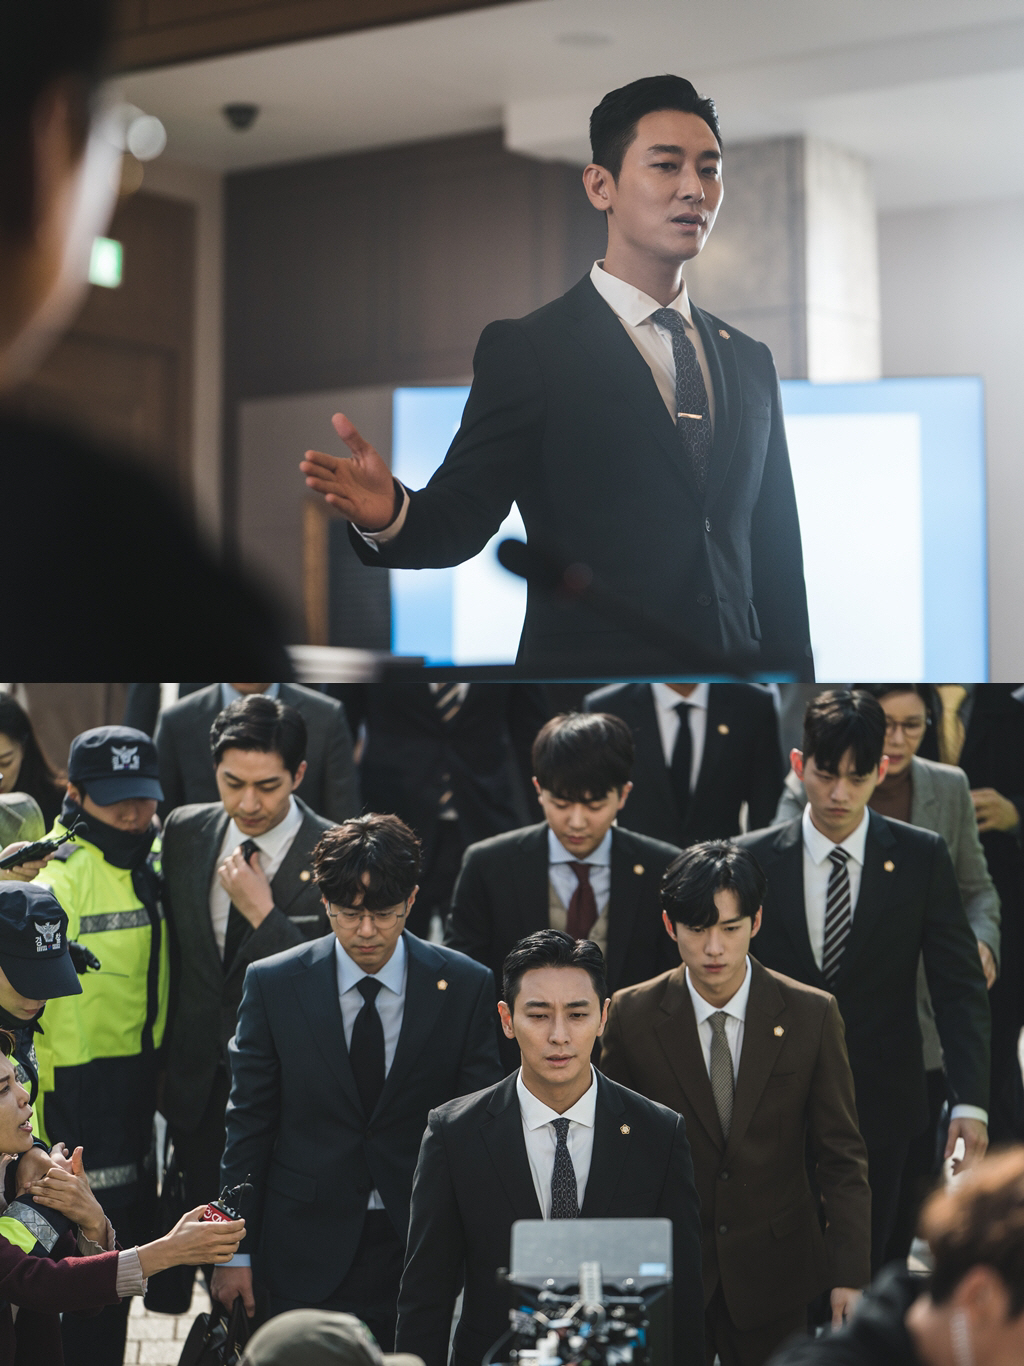 SBSs new gilt drama Hyena [playplayed by Kim Ru-ri/directed by Jang Tae-yu/production Keith (CEO Park Sung-hye, Shin Pil-soon)] is a drama depicting a Hyena-style survival machine that bites and teares and teares the poop-asked Lawyers who have the law in their heads and money in their hearts.Kim Hye-soo and Ju Ji-hoons growl chemistry is anticipated through teasers and posters released earlier.Especially, Hyena is attracting attention as a choice of Ju Ji-hoon who showed character-specific performances regardless of genre such as with God, comic, sex murder, and Drama Kingdom.From the myth of the 20 million box office to the sweeping of 12 awards over the past two years, Ju Ji-hoon, who has been well received by both critics and audiences, can be seen in the first row of the room.On January 22, Hyena side will show the first steel of Ju Ji-hoon and attract attention.Yoon Hee-jae, played by Ju Ji-hoon in the drama, is a legalist who has lived as an elite among the elite.It is a lawyer Song & Kim who has the highest legal power in Korea as well as being united with confidence and pride, and has the ability to meet it.Ju Ji-hoon has shown perfect appearance of the star-studded child star, Lawyer Yoon Hee-jae, with excellent concentration and expressive power from the first shooting.Ju Ji-hoons extraordinary aura, which can be felt even if it stands still, completed the character of Yoon Hee-jae more intensely.I do not doubt that viewers will fall into the new charm of Ju Ji-hoon, which will fill the house theater. The first broadcast of Hyena, which falls into the sexy charisma of actor Ju Ji-hoon who has released a heavy presence from the first shooting, is aptly awaited.Meanwhile, SBS new gilt drama Hyena will be broadcasted at 10 pm on February 21 following Stobrig.